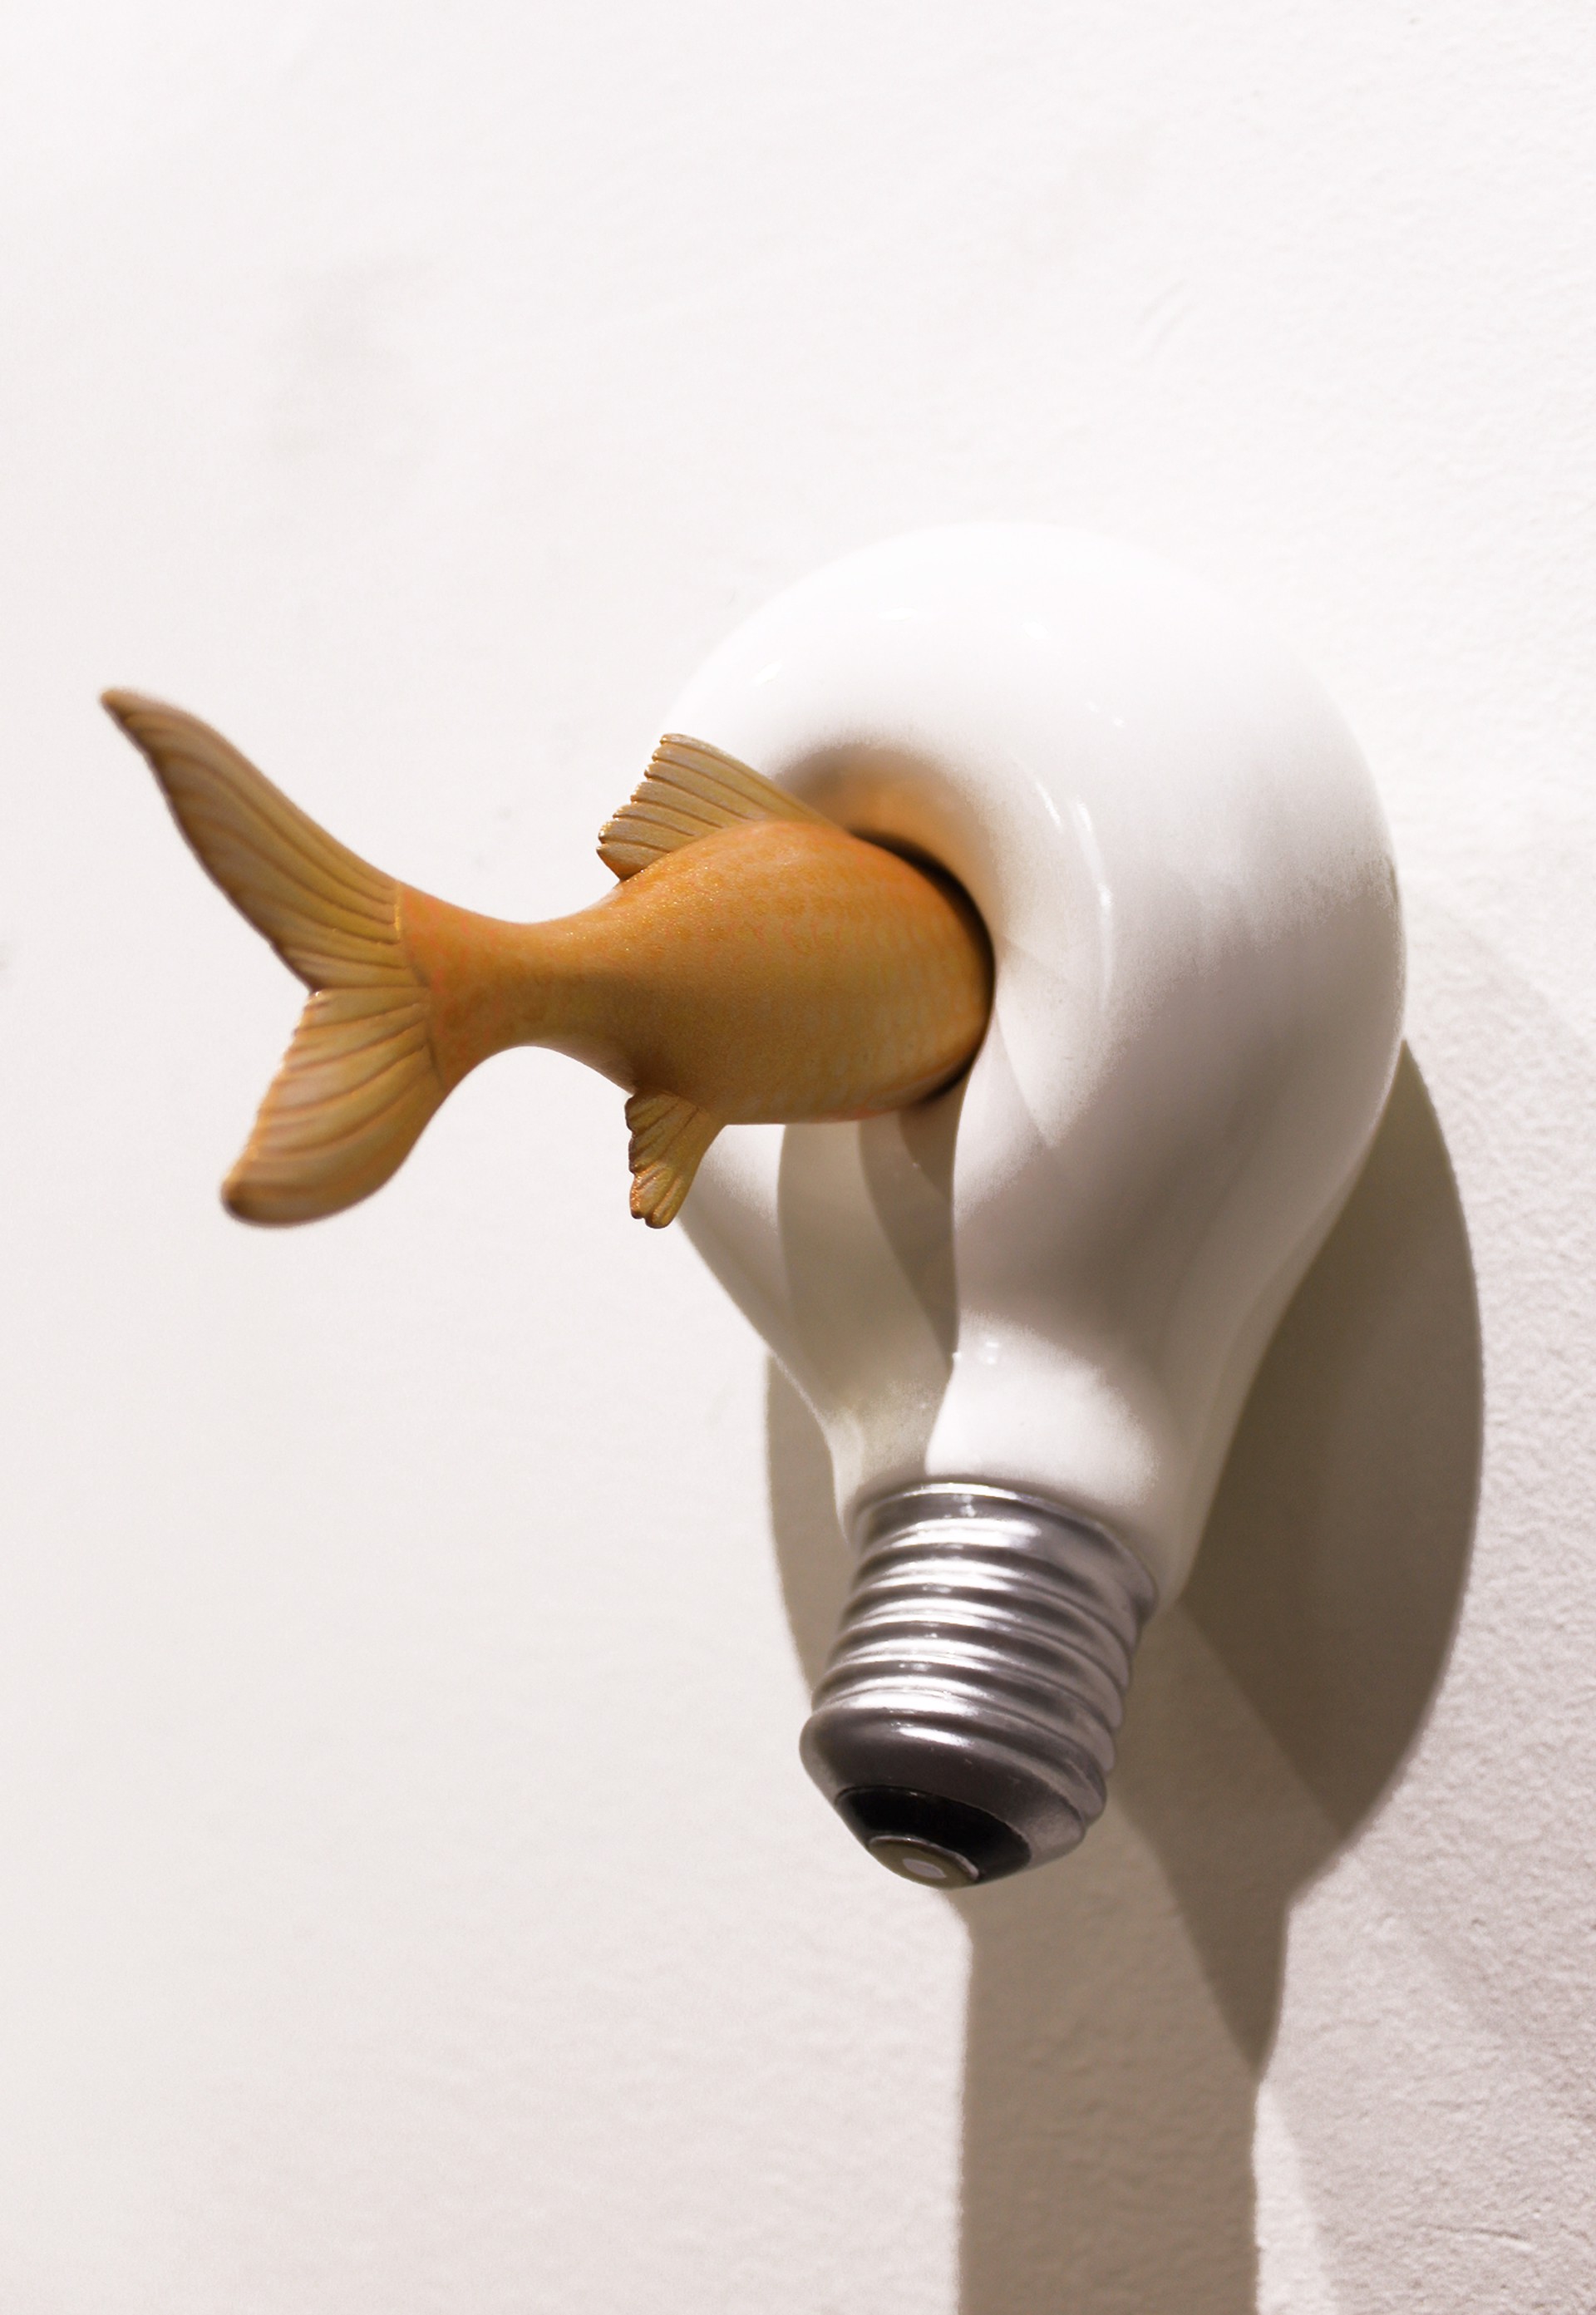 Brite Idea: Light Where You Need It (Fish) by Sean O'Meallie